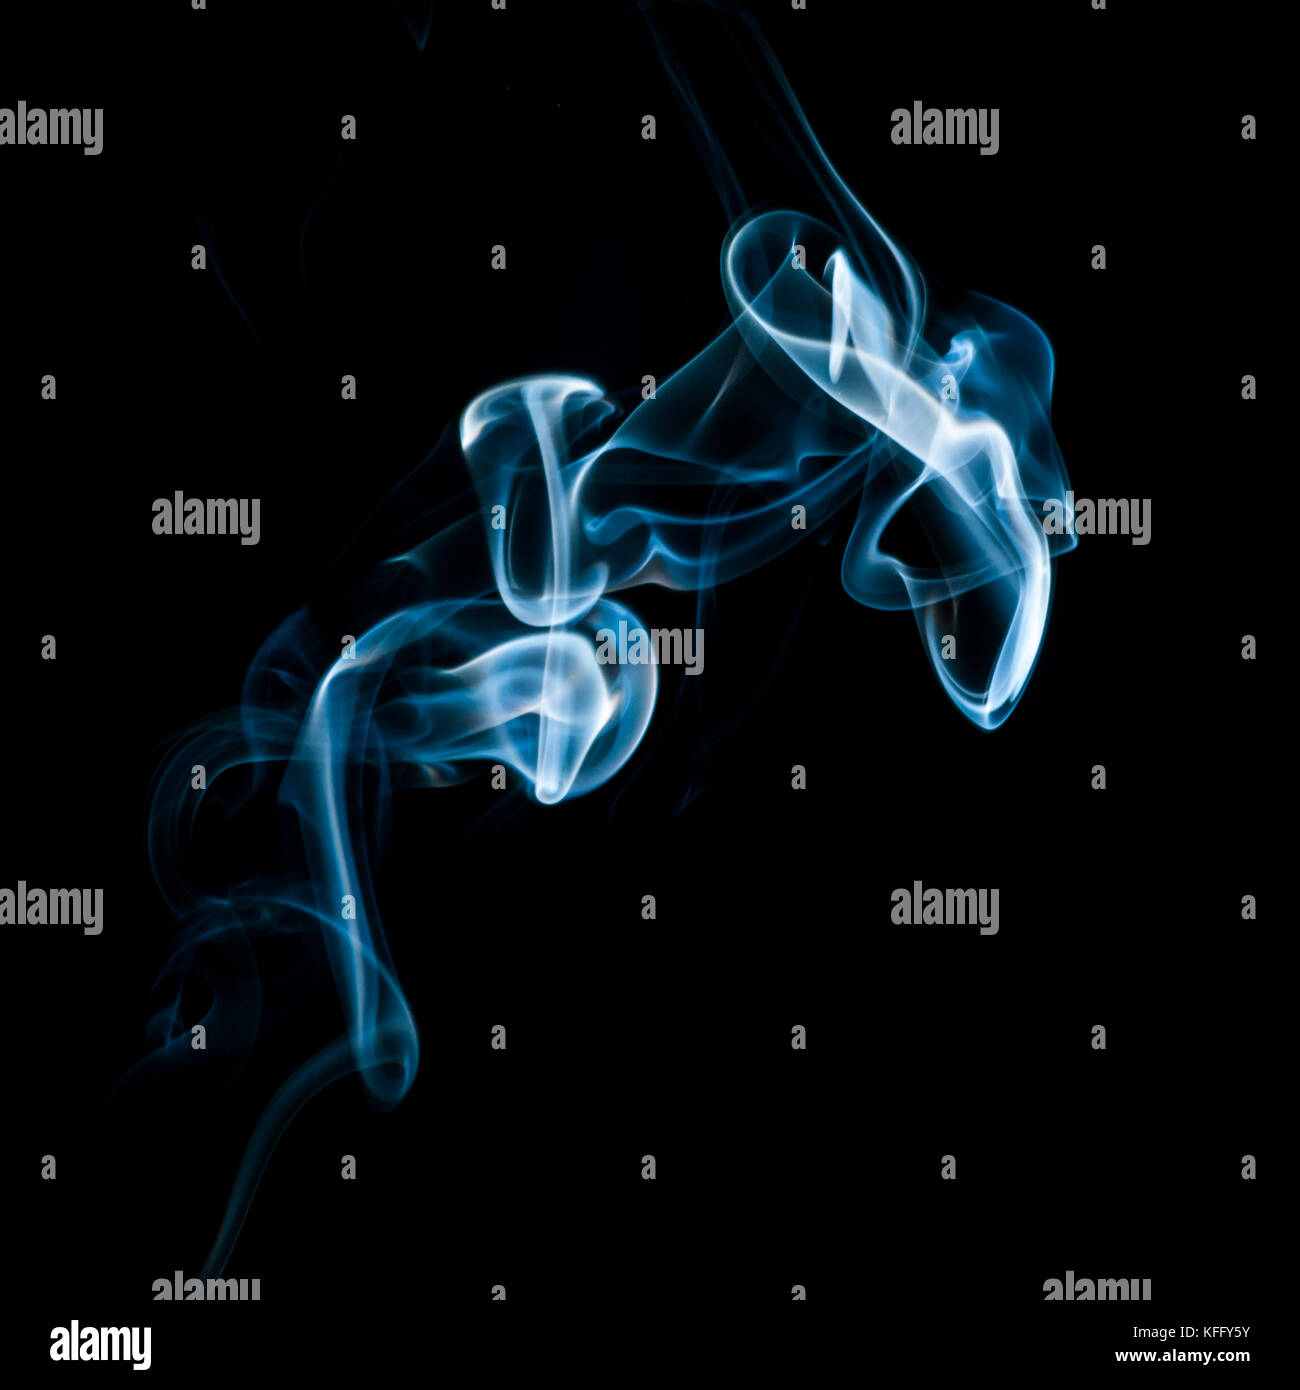 The abstract pattern made from smoke rising from an incense stick. Stock Photo